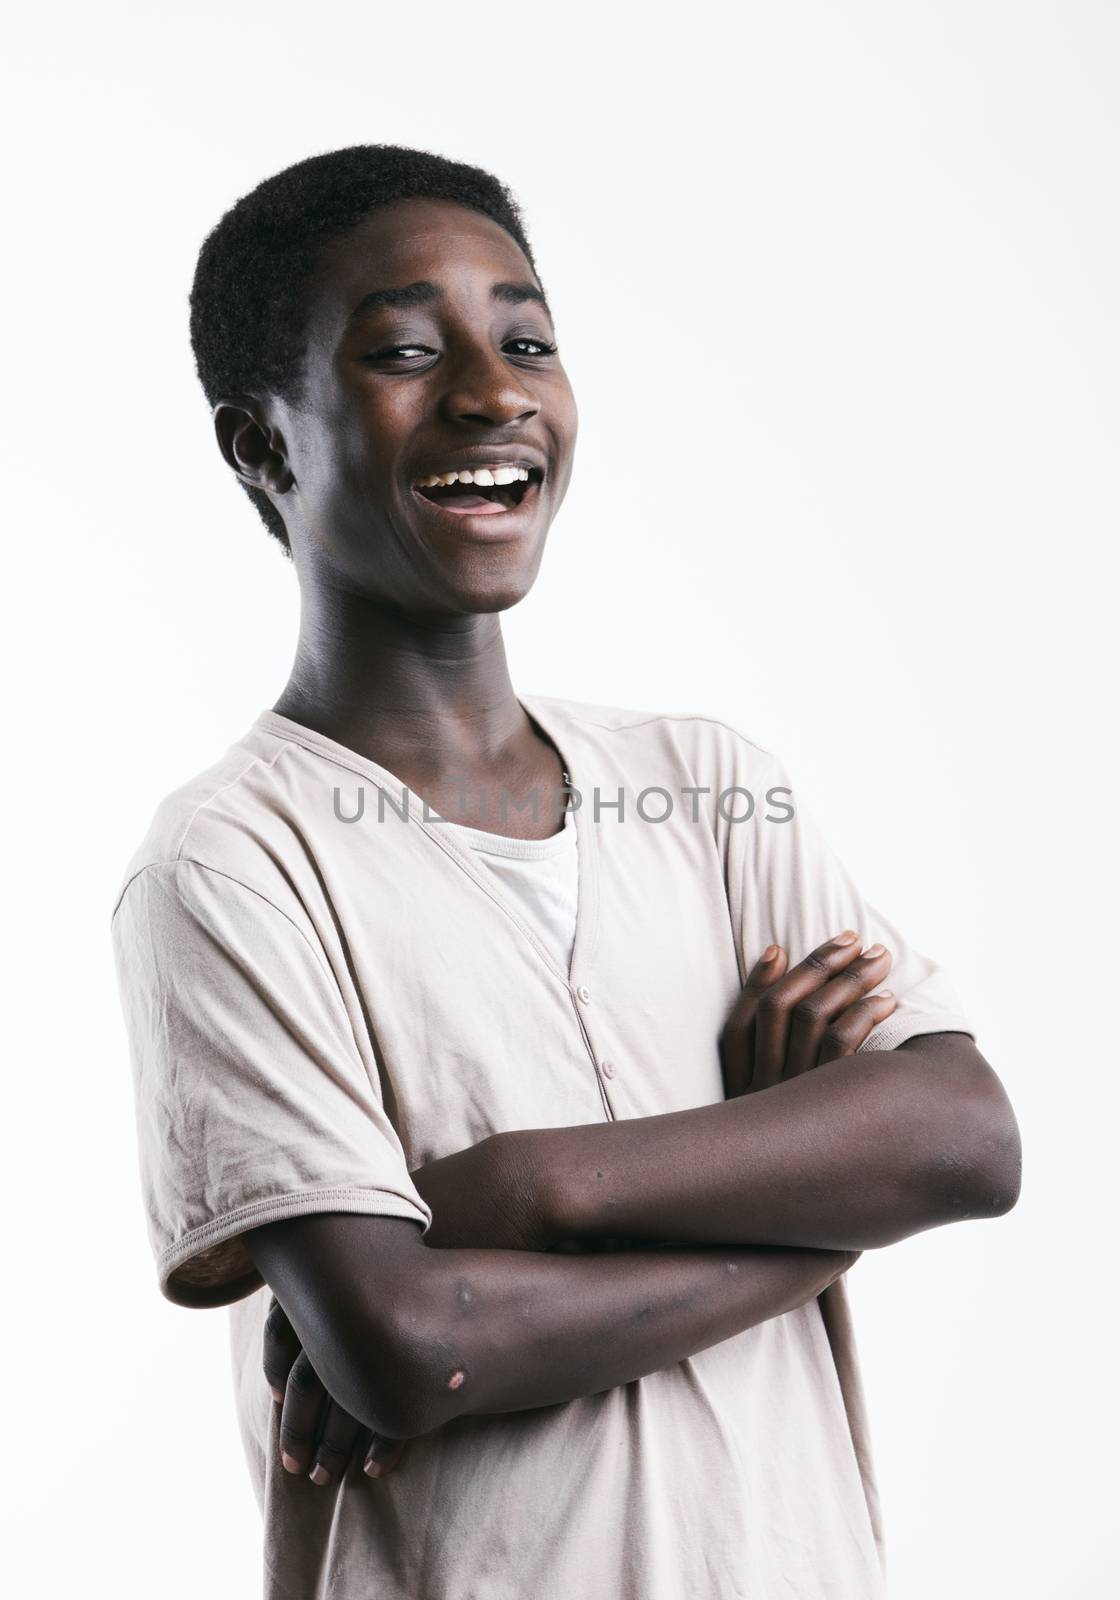 Portrait of an happines African boy on white background